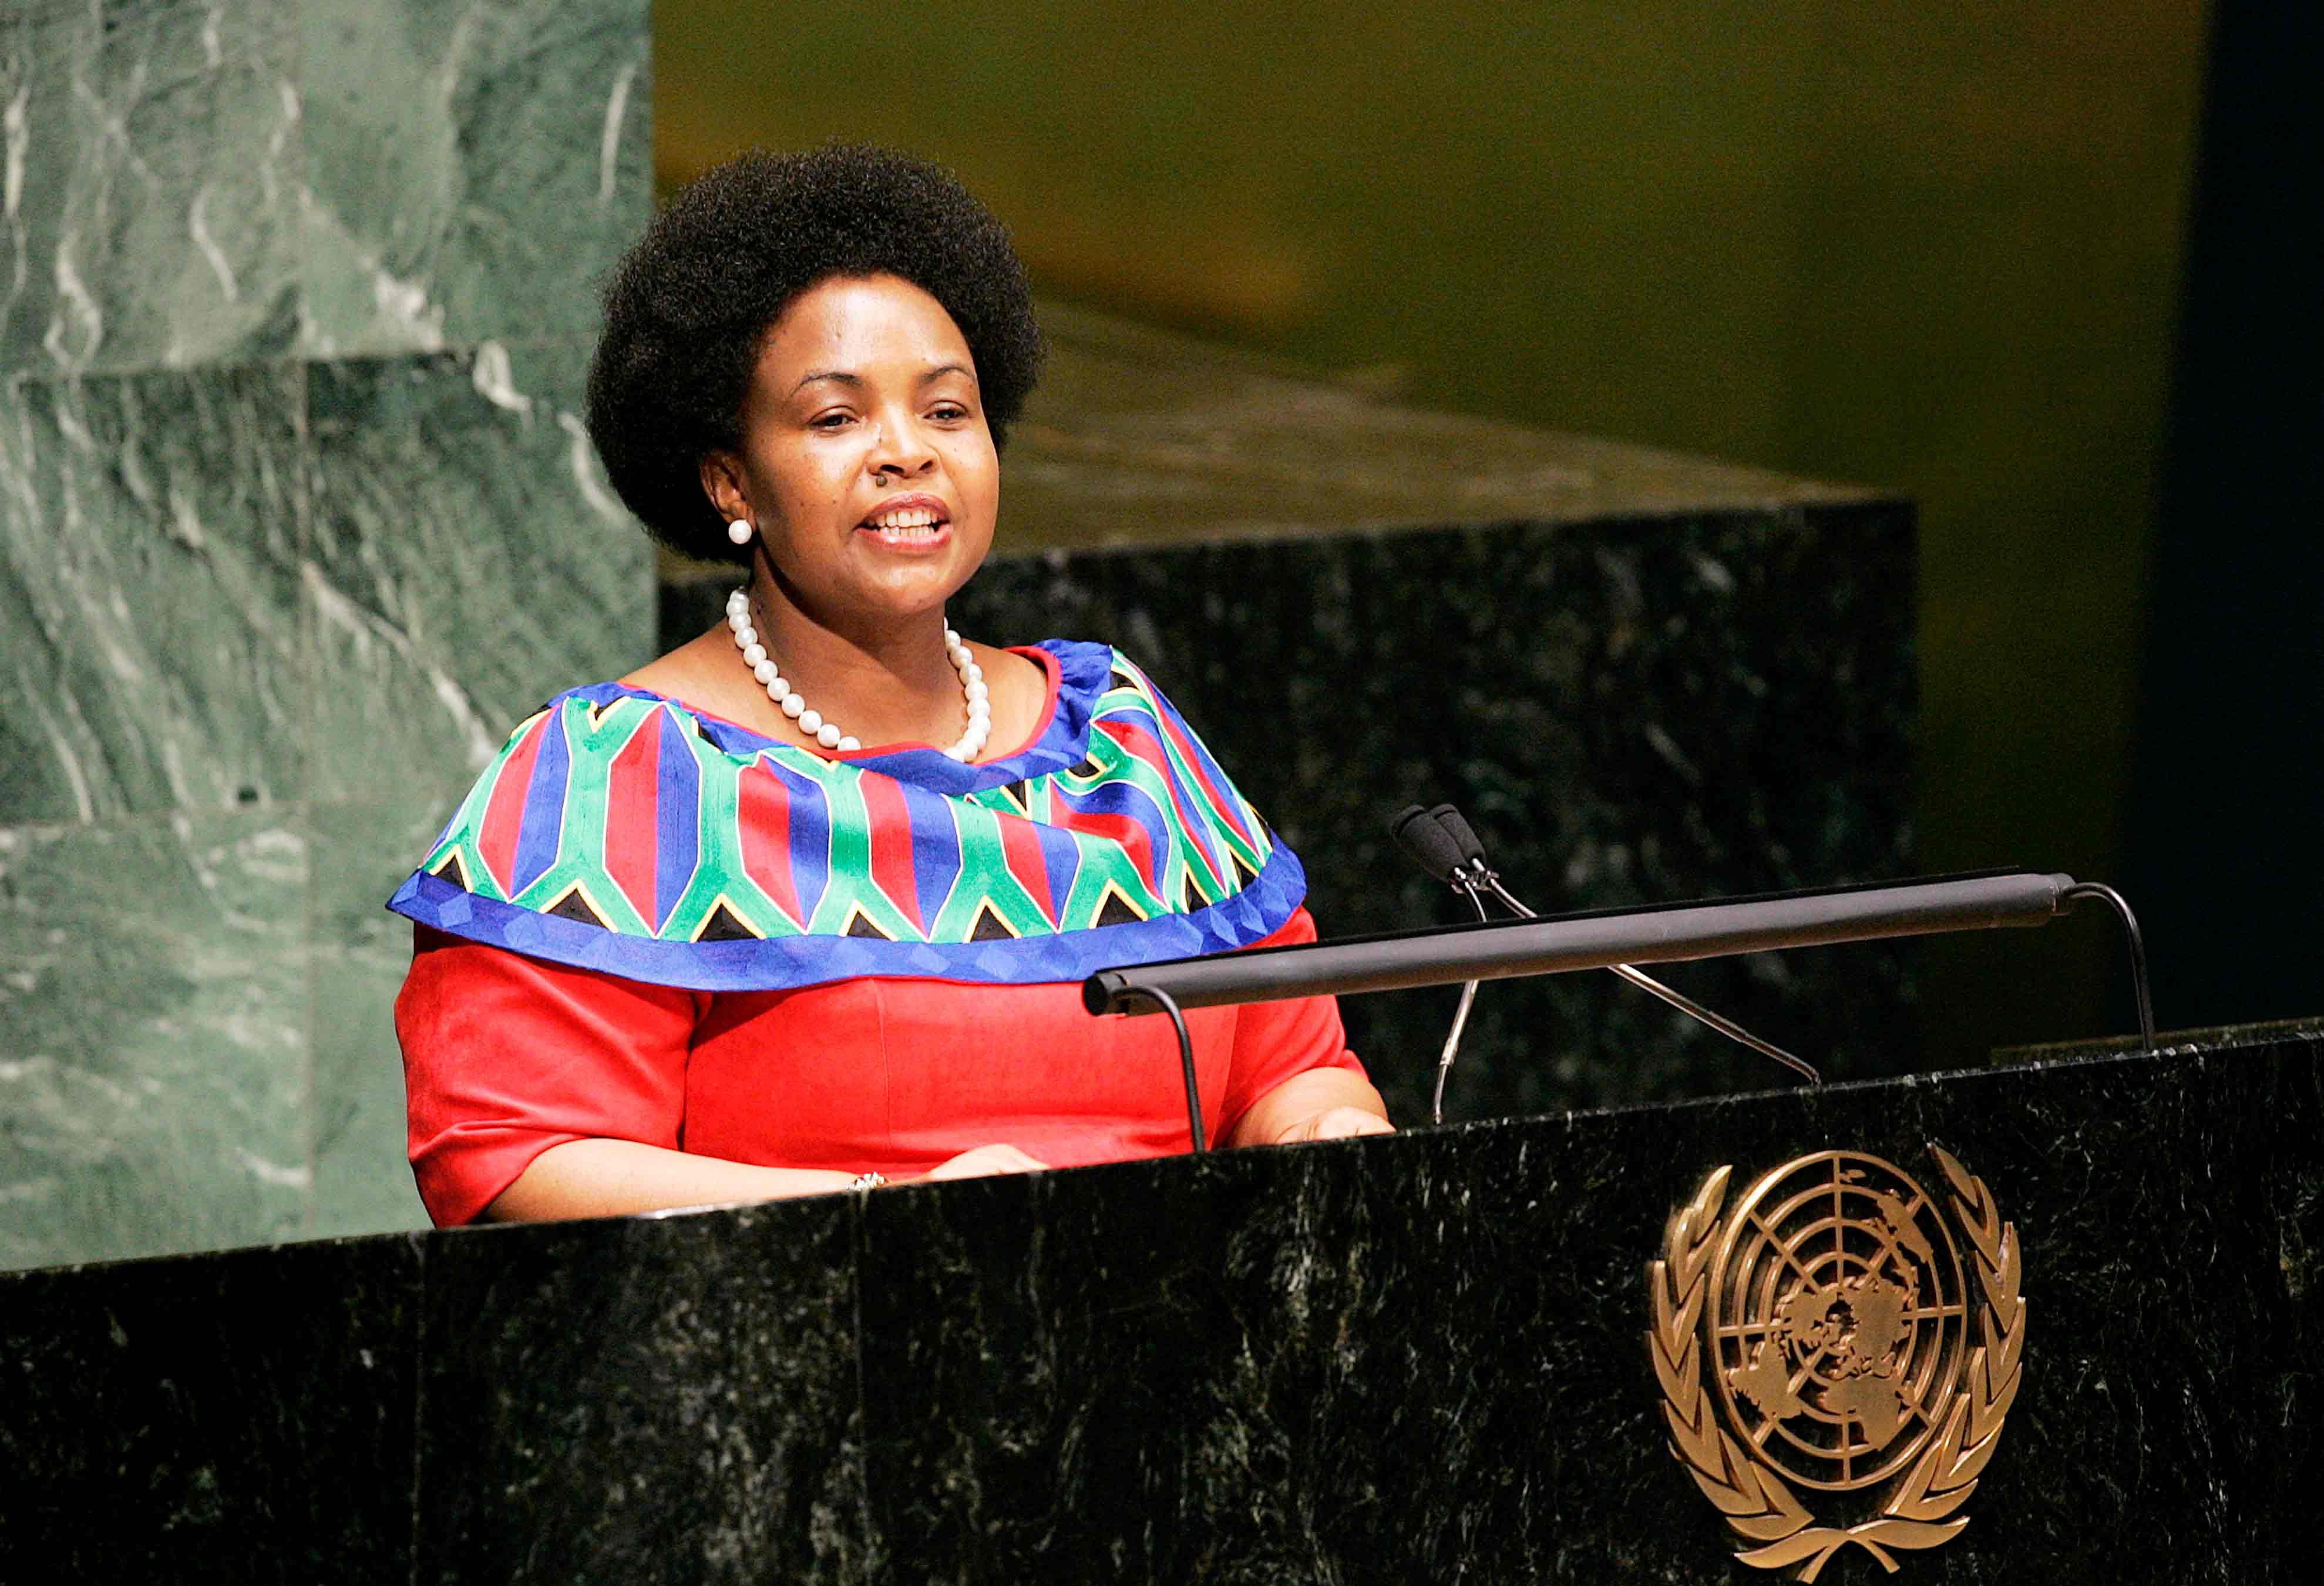 Maite Nkoana-Mashabane (Minister for International Relations and Cooperation of the Republic of South Africa) addresses the General Assembly's celebration of the first International Nelson Mandela Day.  © UN Photo/Devra Berkowitz